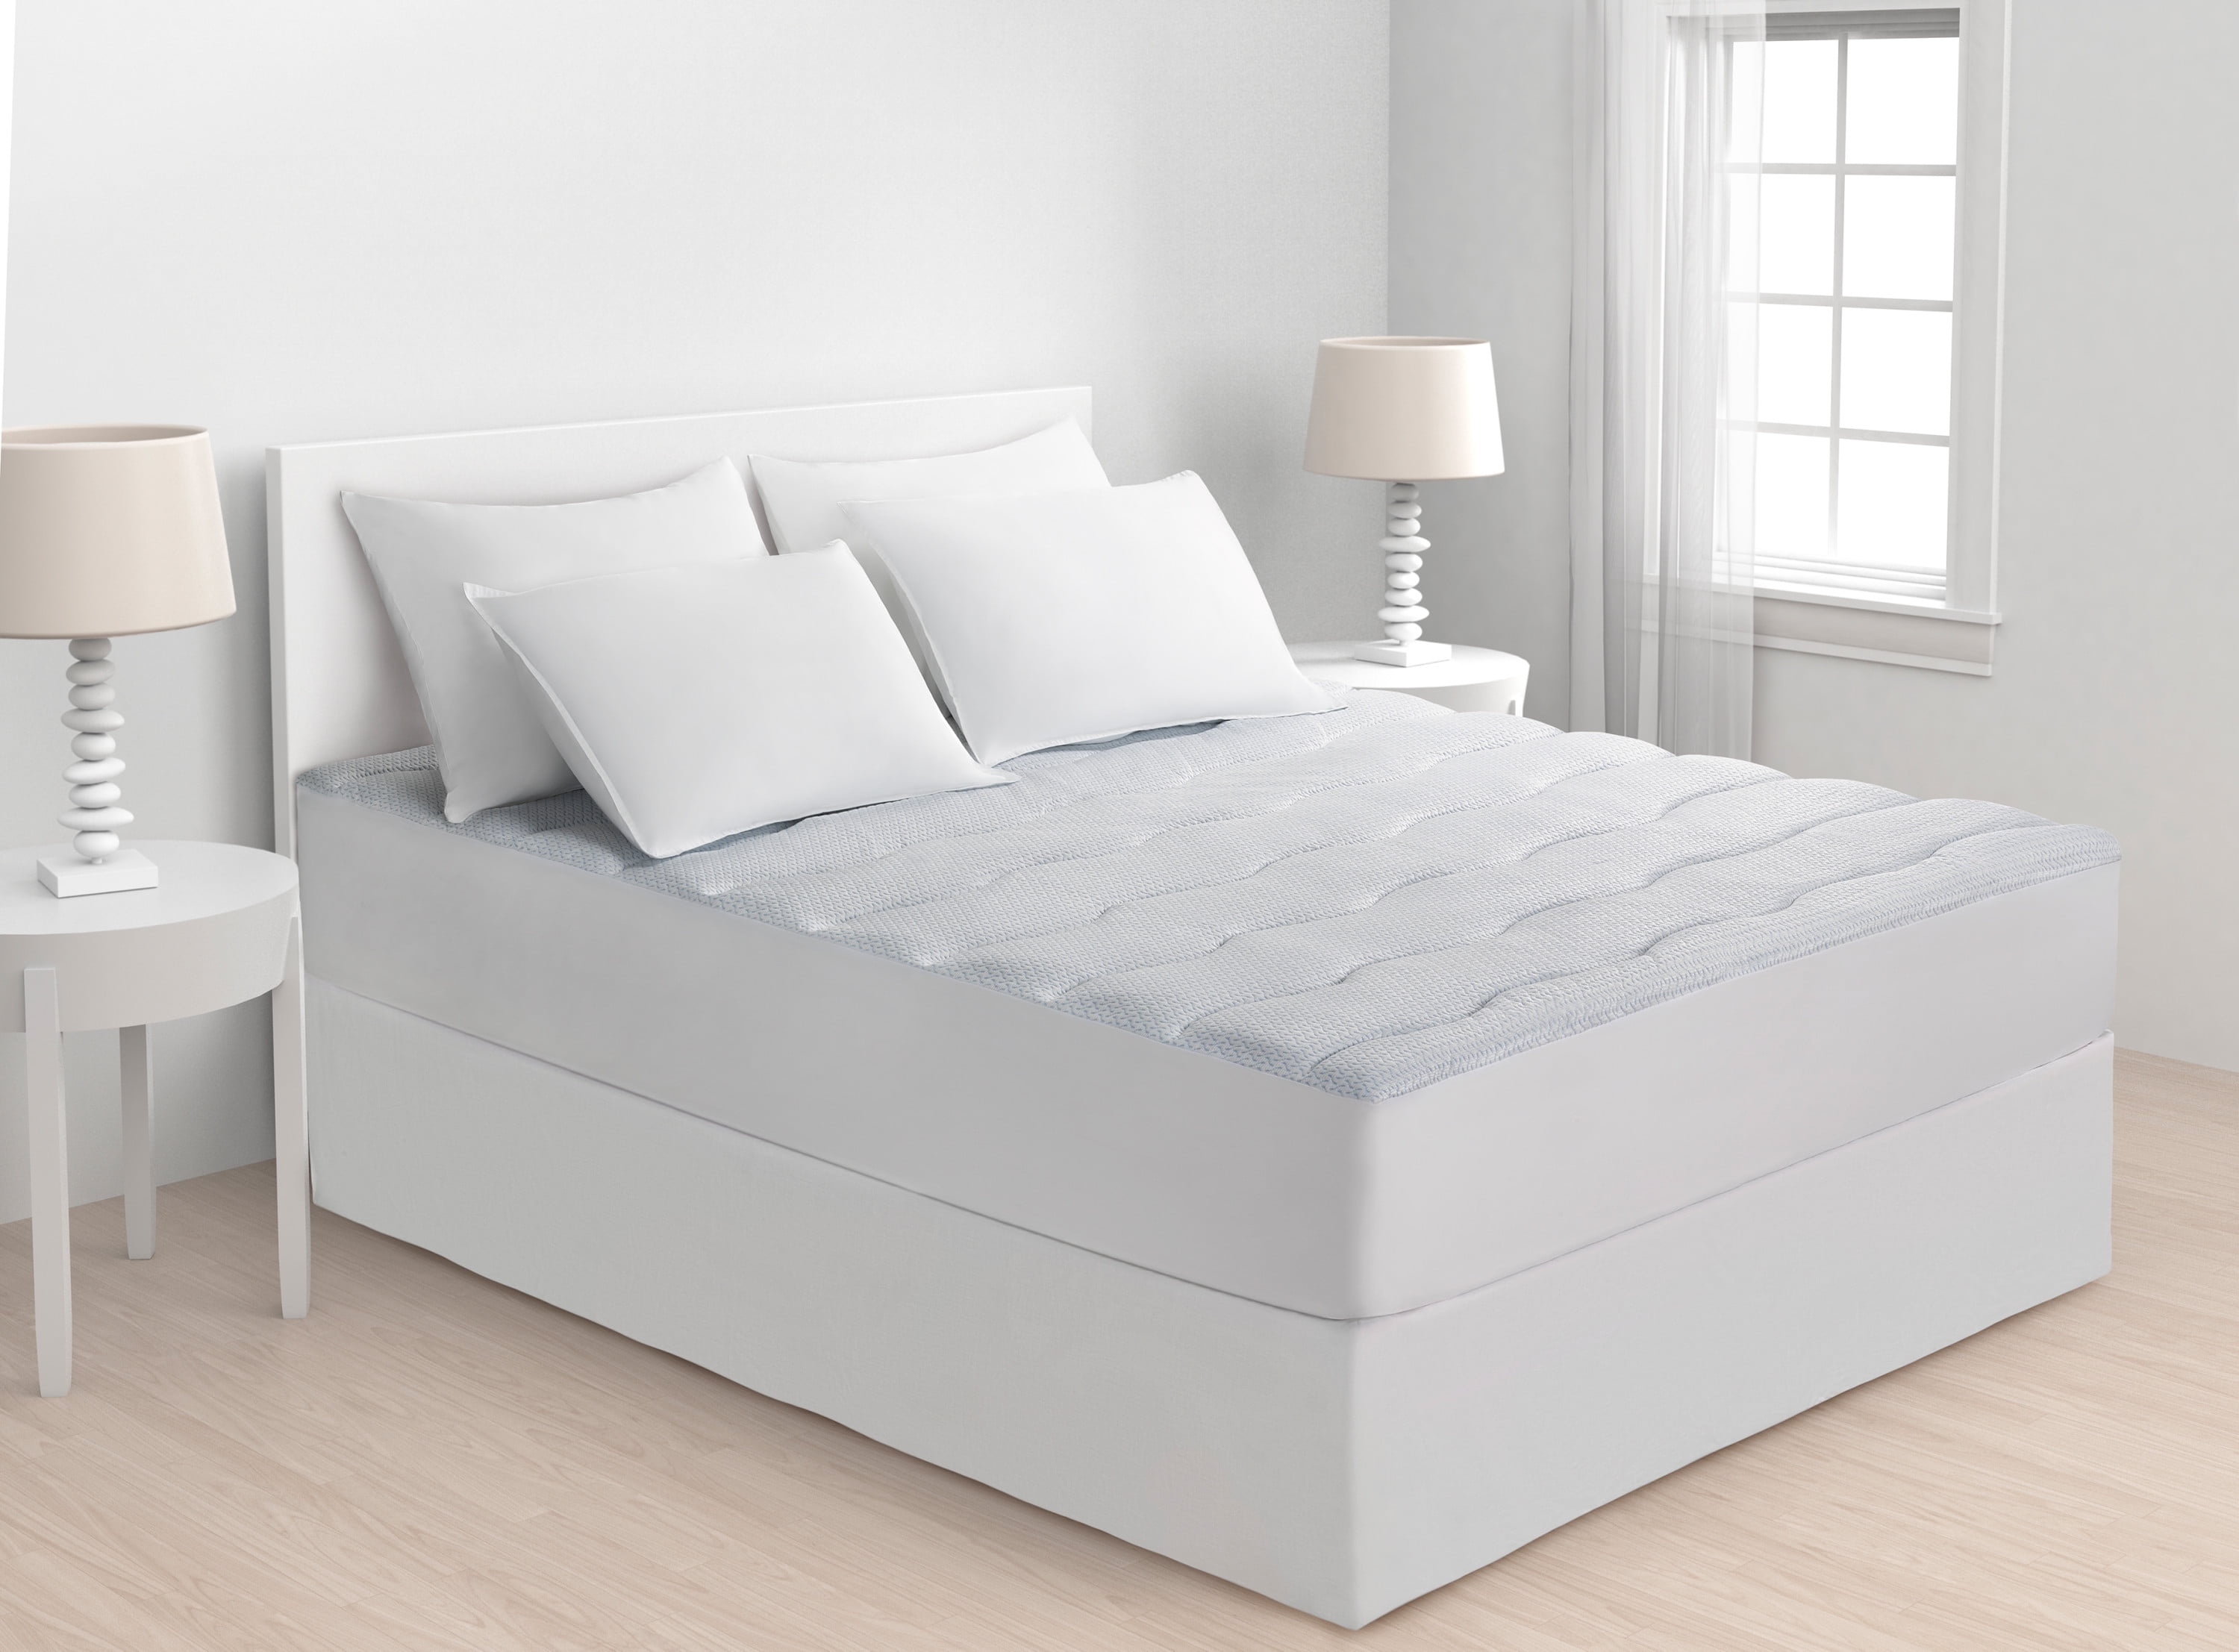 bed mattress sizes dimensions